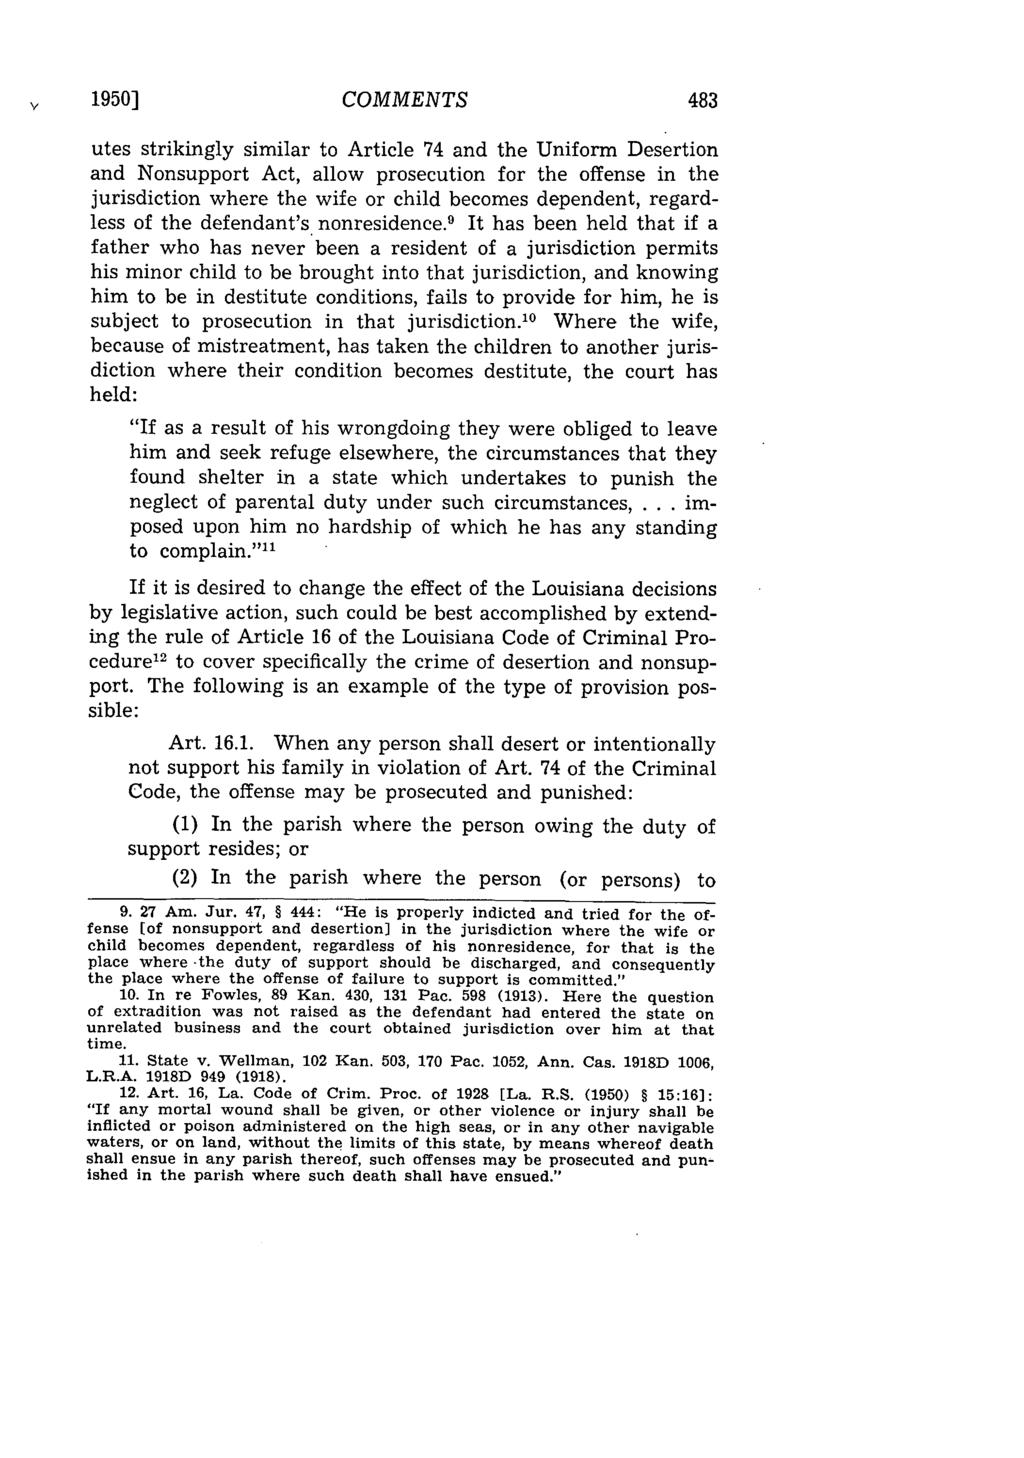 1/ 1950] COMMENTS utes strikingly similar to Article 74 and the Uniform Desertion and Nonsupport Act, allow prosecution for the offense in the jurisdiction where the wife or child becomes dependent,